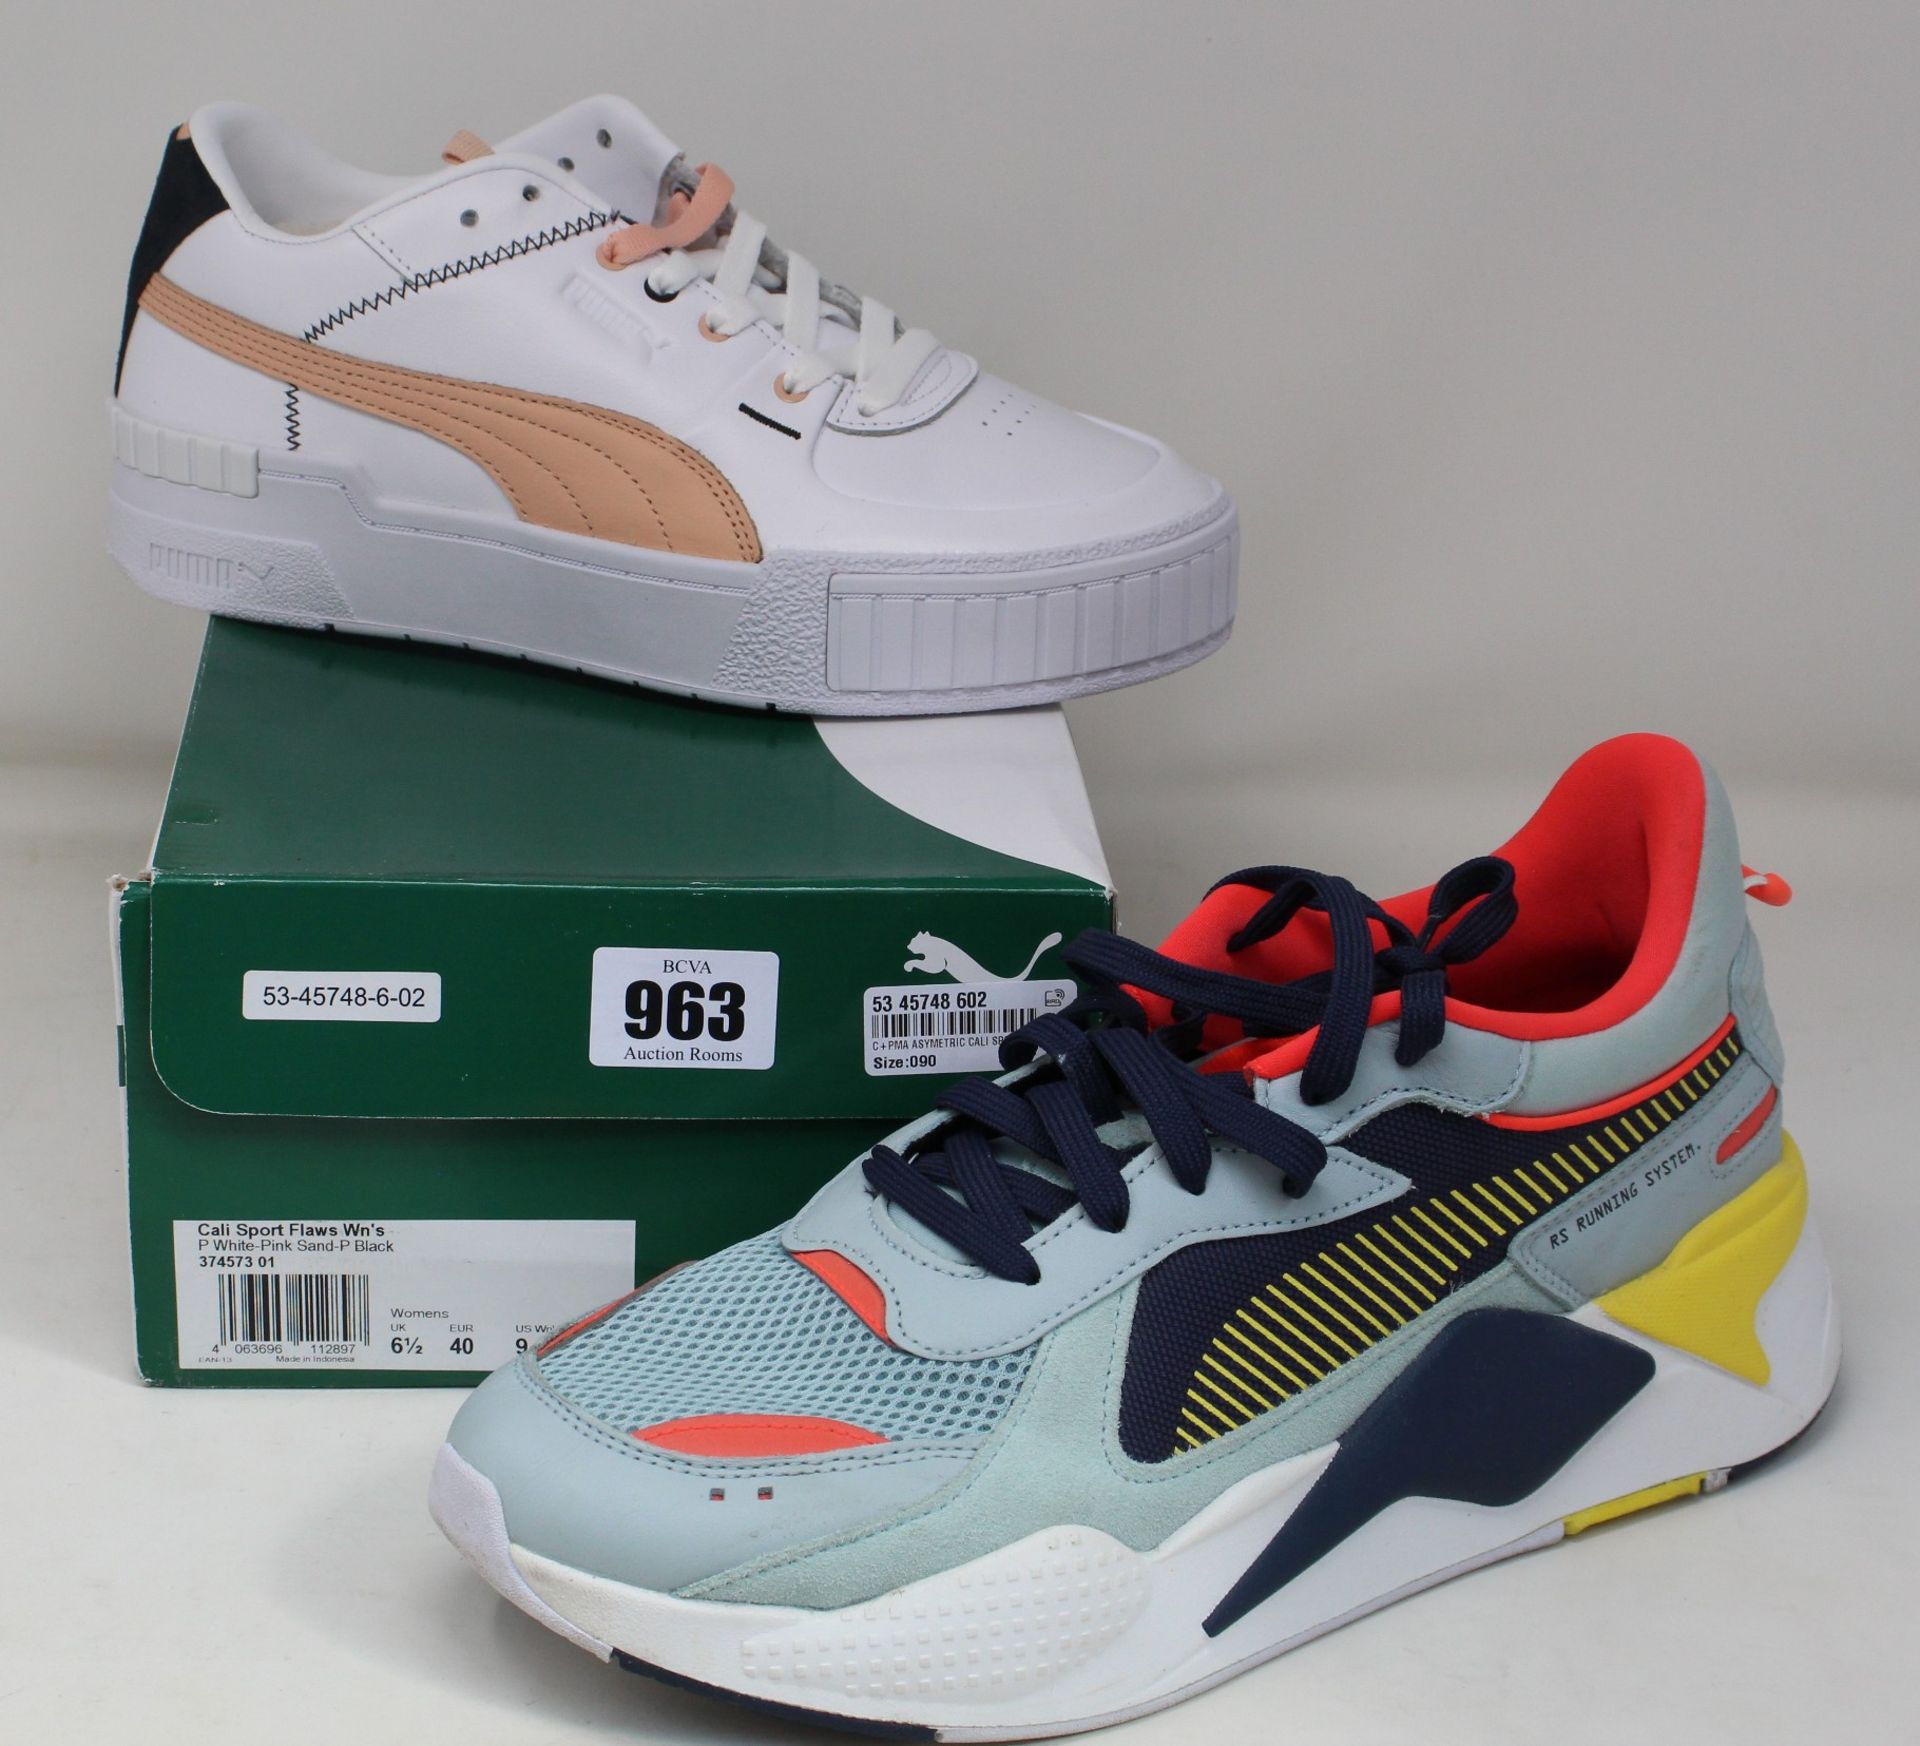 Two pairs of as new Puma trainers; RS-X Reinvention (UK 10) and women's Cali Sport Flaws (UK 6.5).